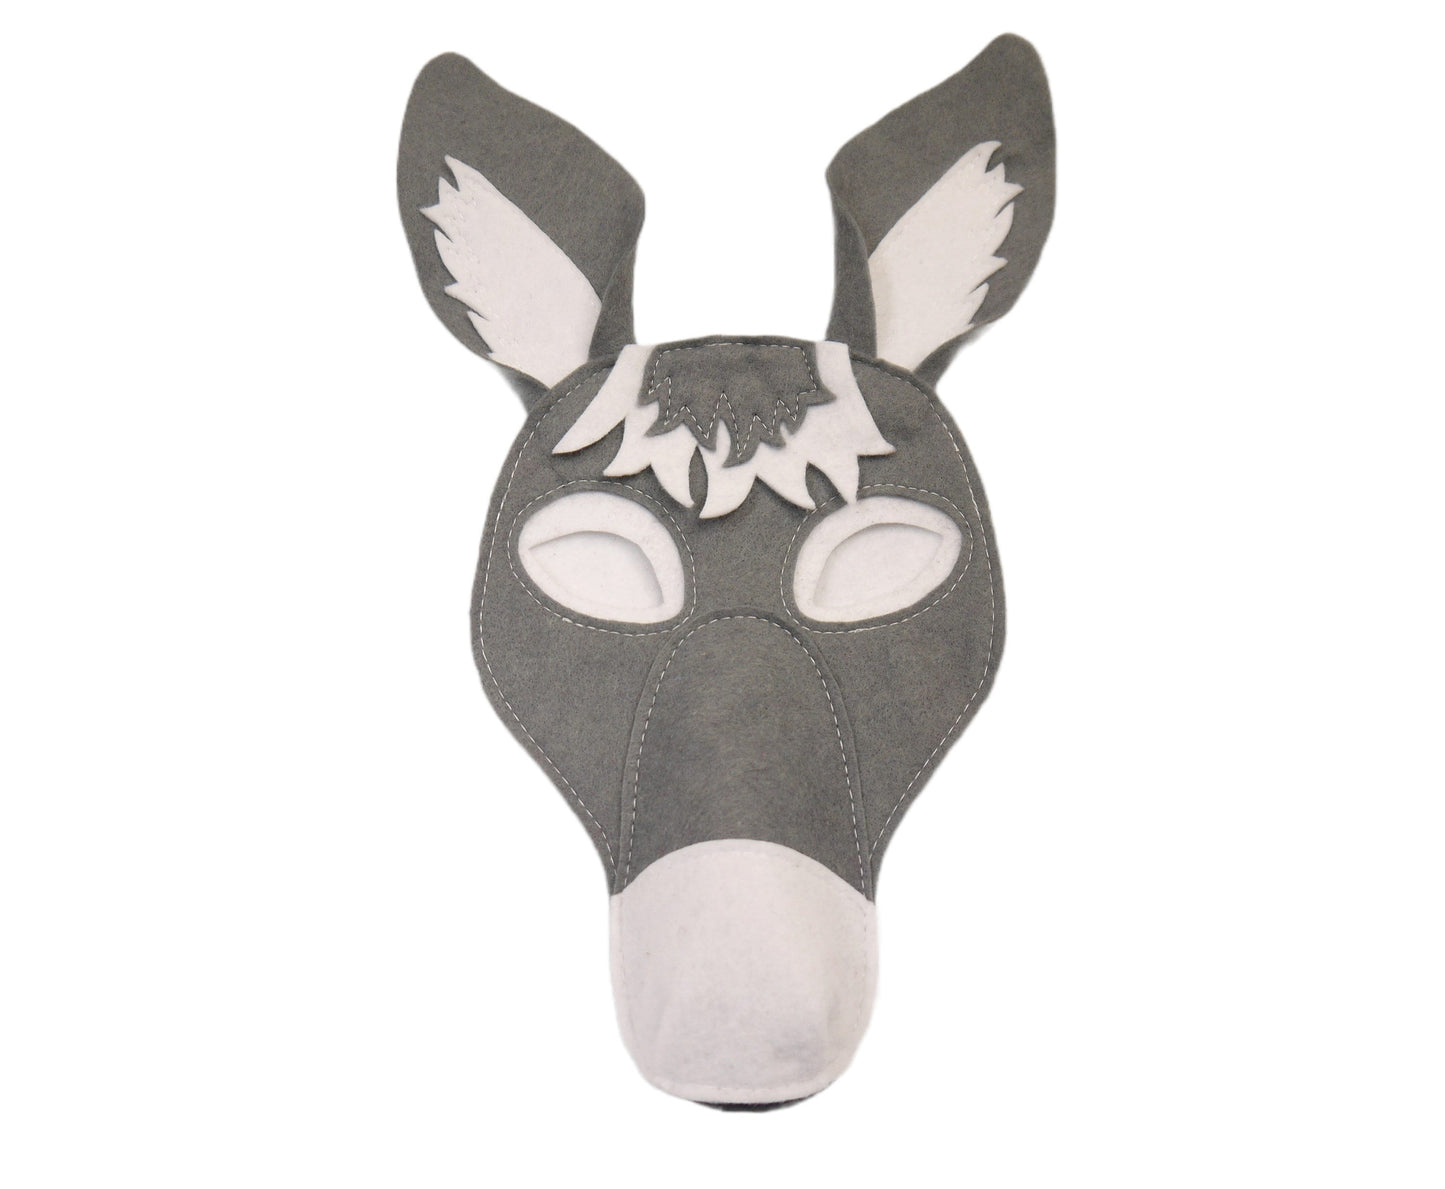 Donkey costume mask, book day, animal, gift, boys, girls, children's, Adults, dress up gift, theatre